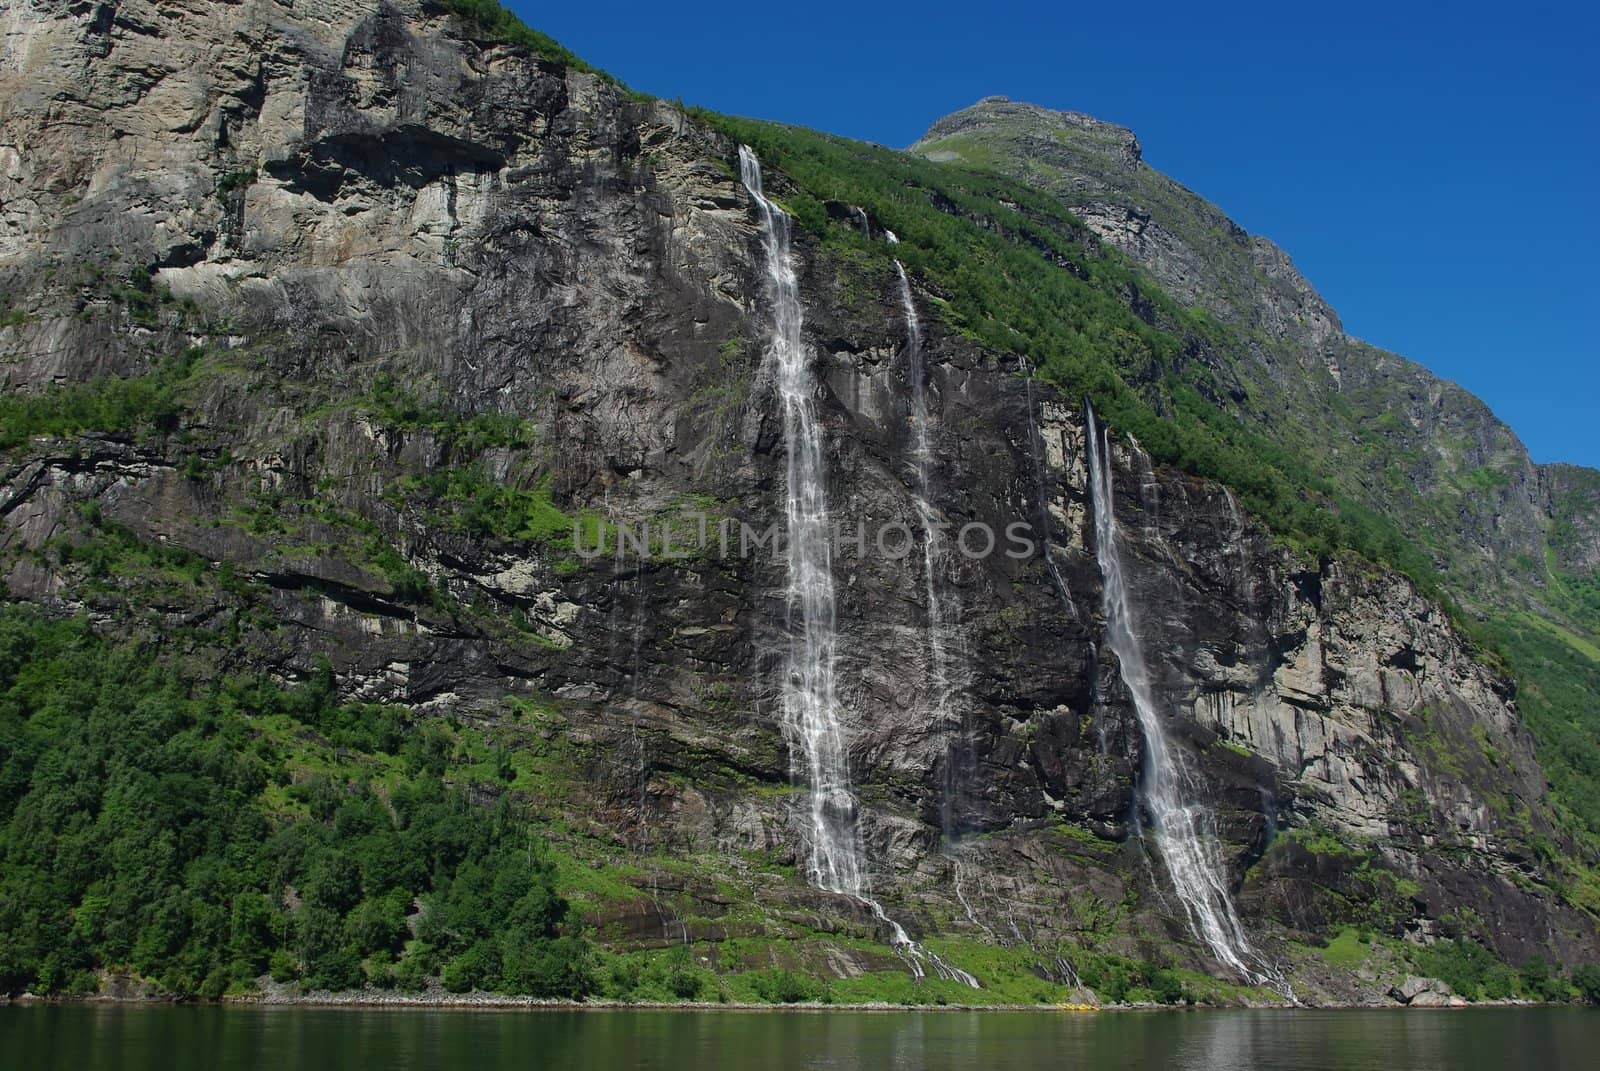 Mountain river with waterfalls in Norway, Geiranger